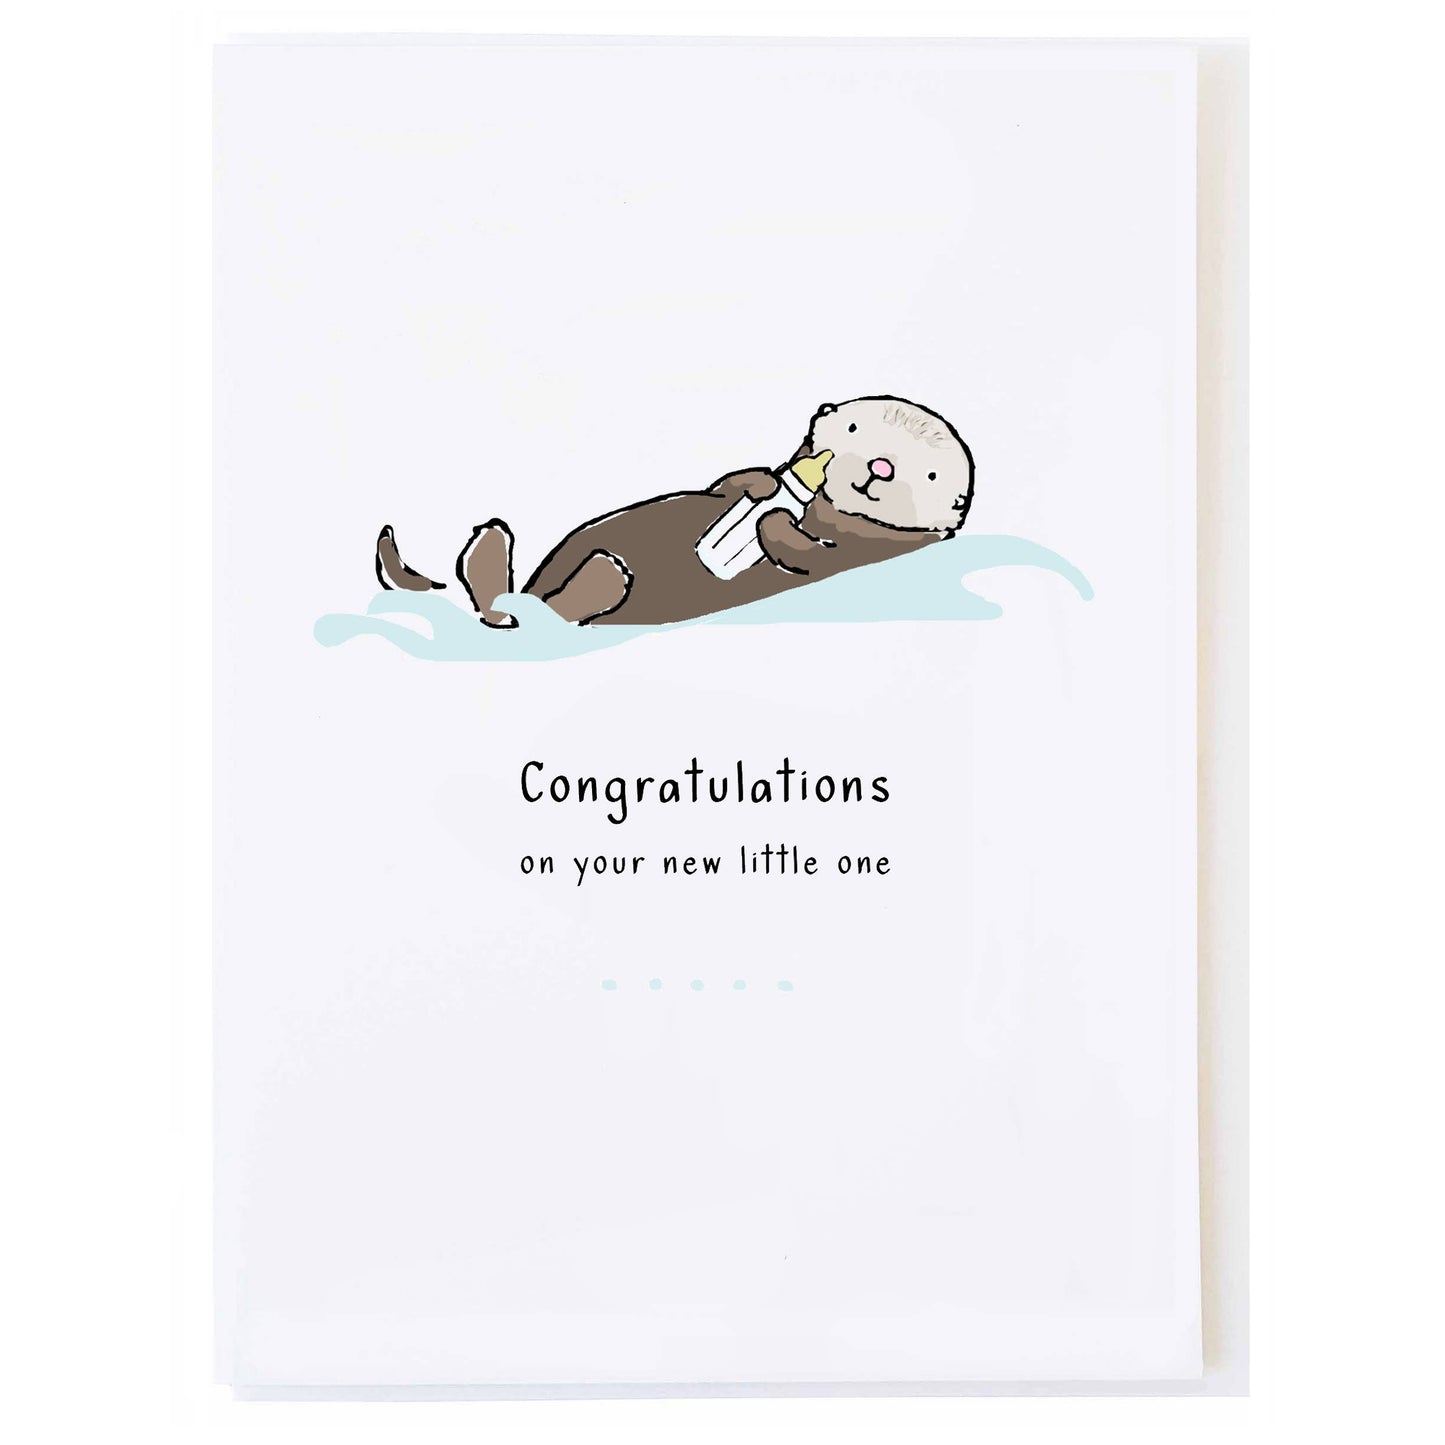 Baby Otter - New Baby Greeting Card (Blank Inside) by Molly O